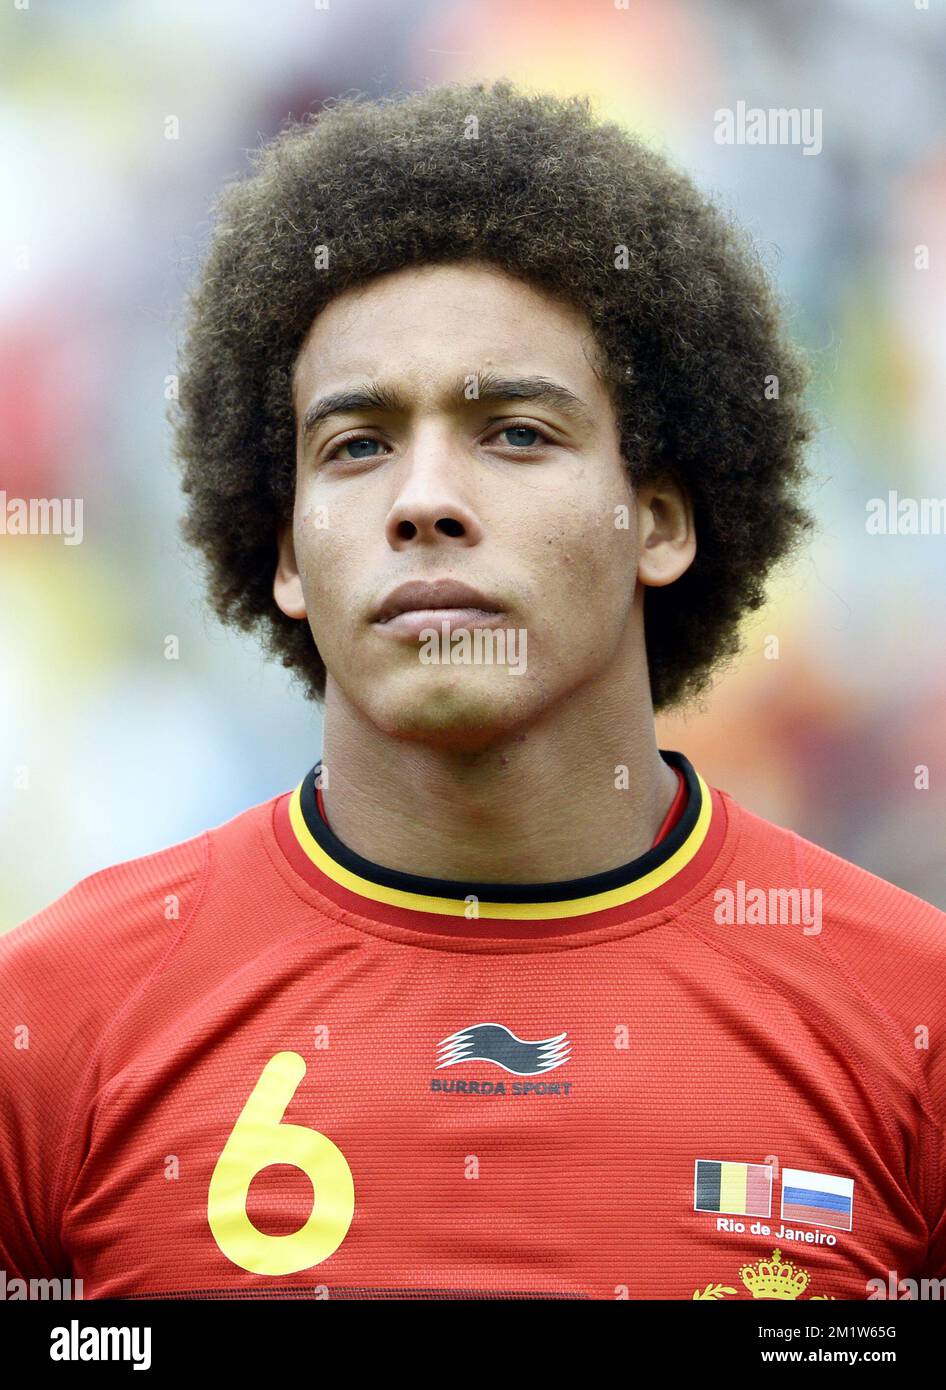 20140622 - RIO DE JANEIRO, BRAZIL: Belgium's Axel Witsel pictured at the start of a soccer game between Belgian national team The Red Devils and Russia in Rio de Janeiro, Brazil, the second game in Group H of the first round of the 2014 FIFA World Cup, Sunday 22 June 2014.   BELGA PHOTO DIRK WAEM Stock Photo